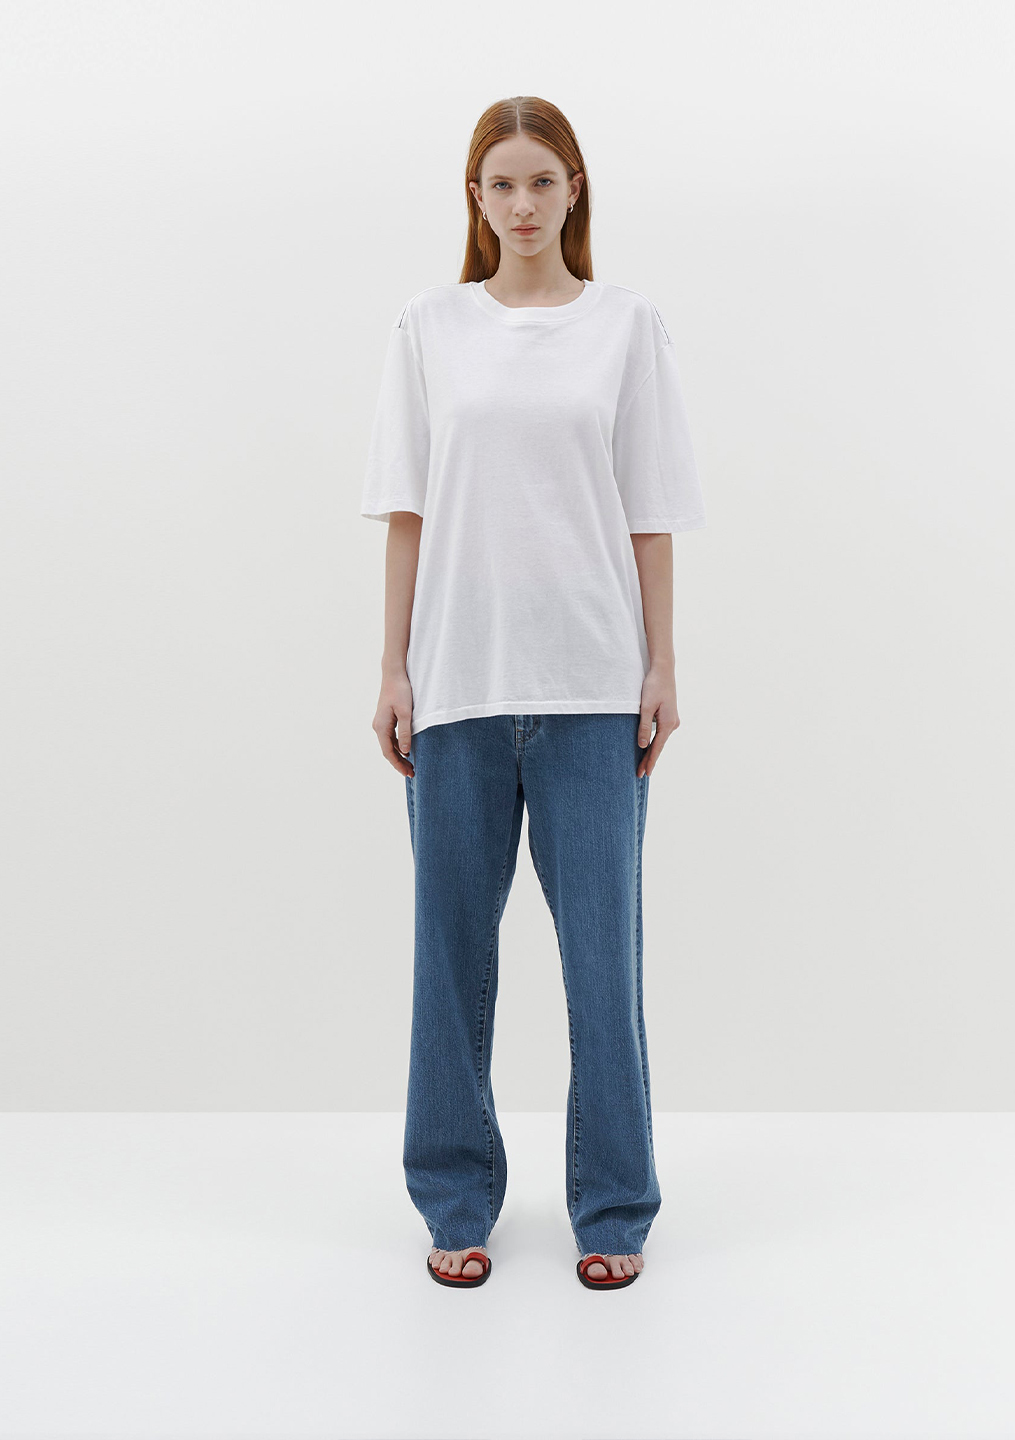 Bassike | Slouch Boyfriend S/S T Shirt - White - Contain Boutique